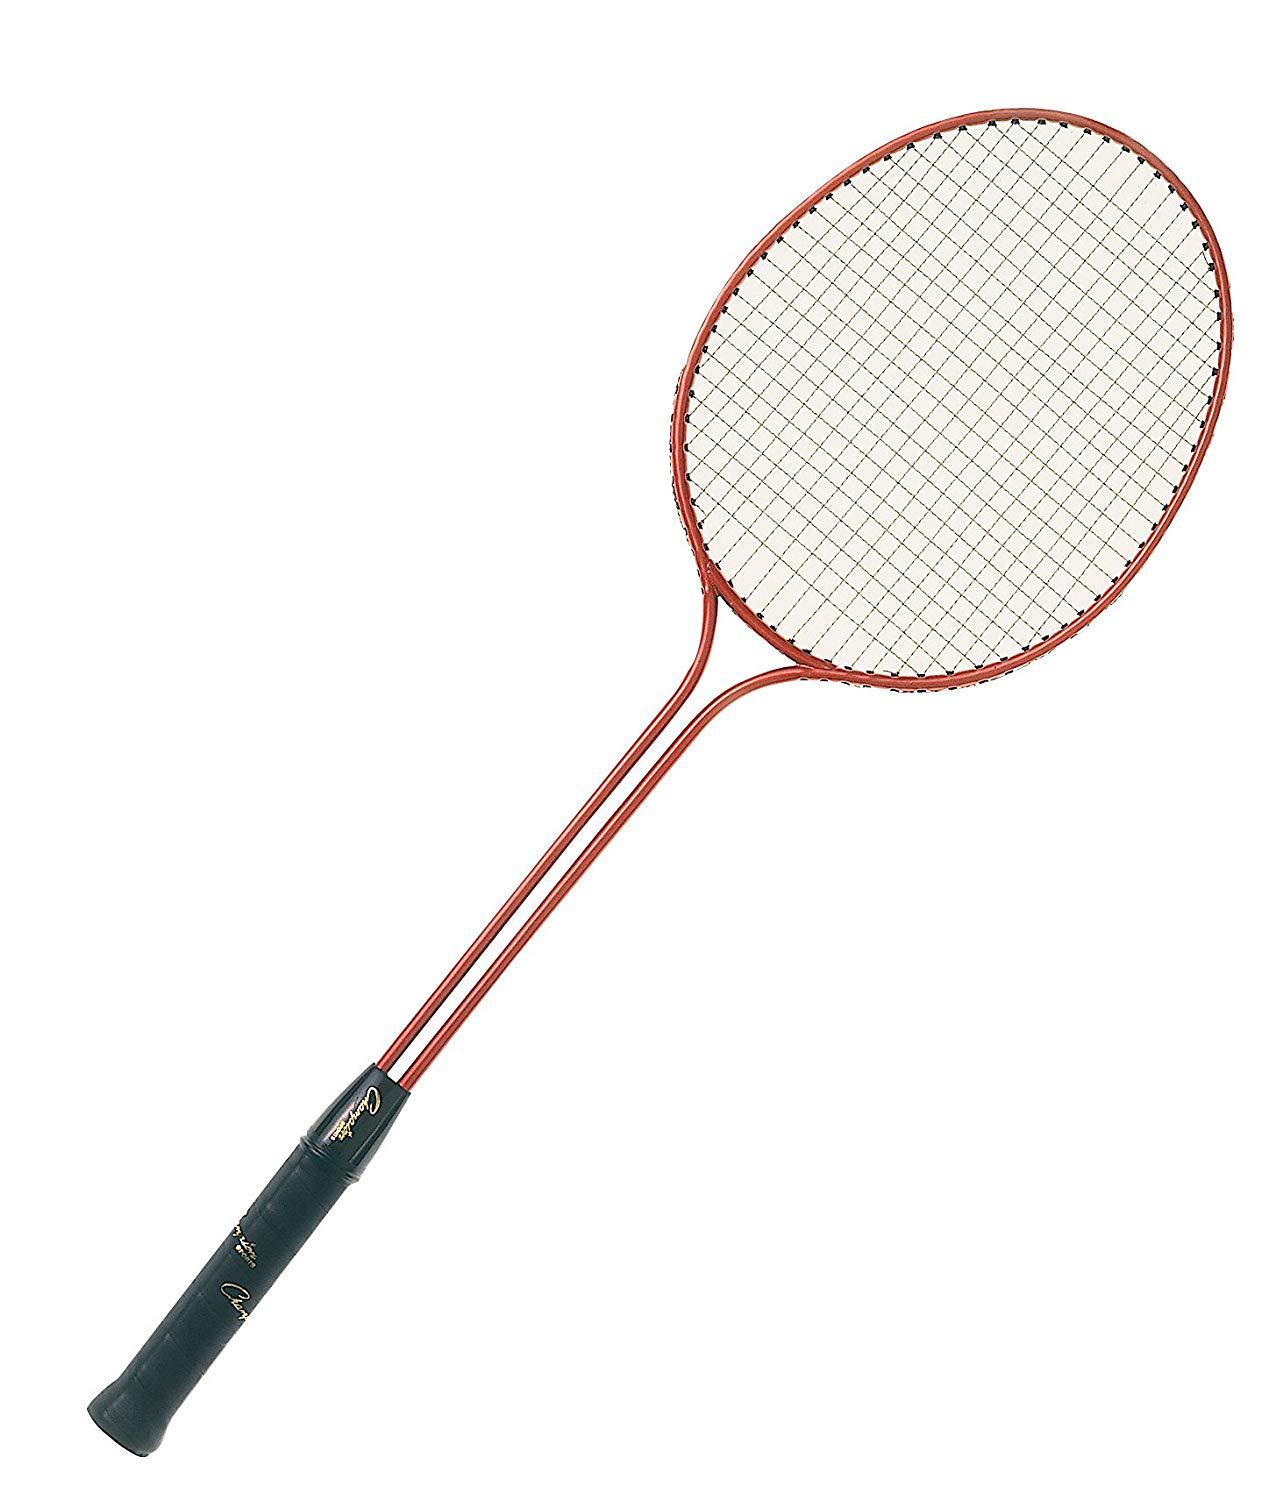 The Best Badminton Rackets for Intermediate Players ...